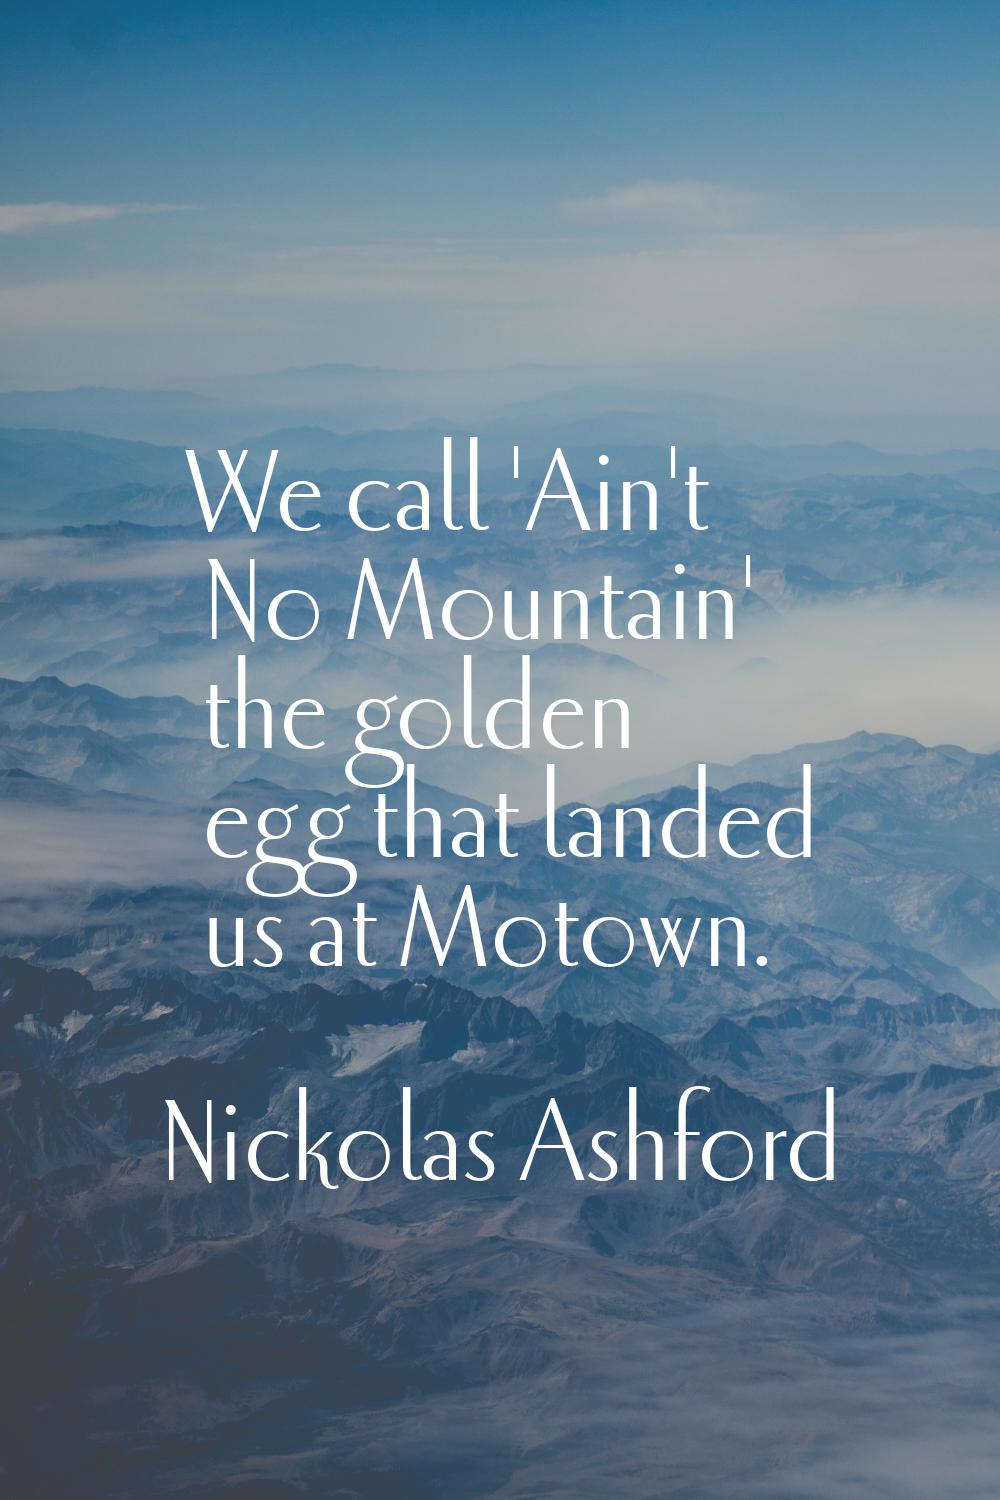 We call 'Ain't No Mountain' the golden egg that landed us at Motown.